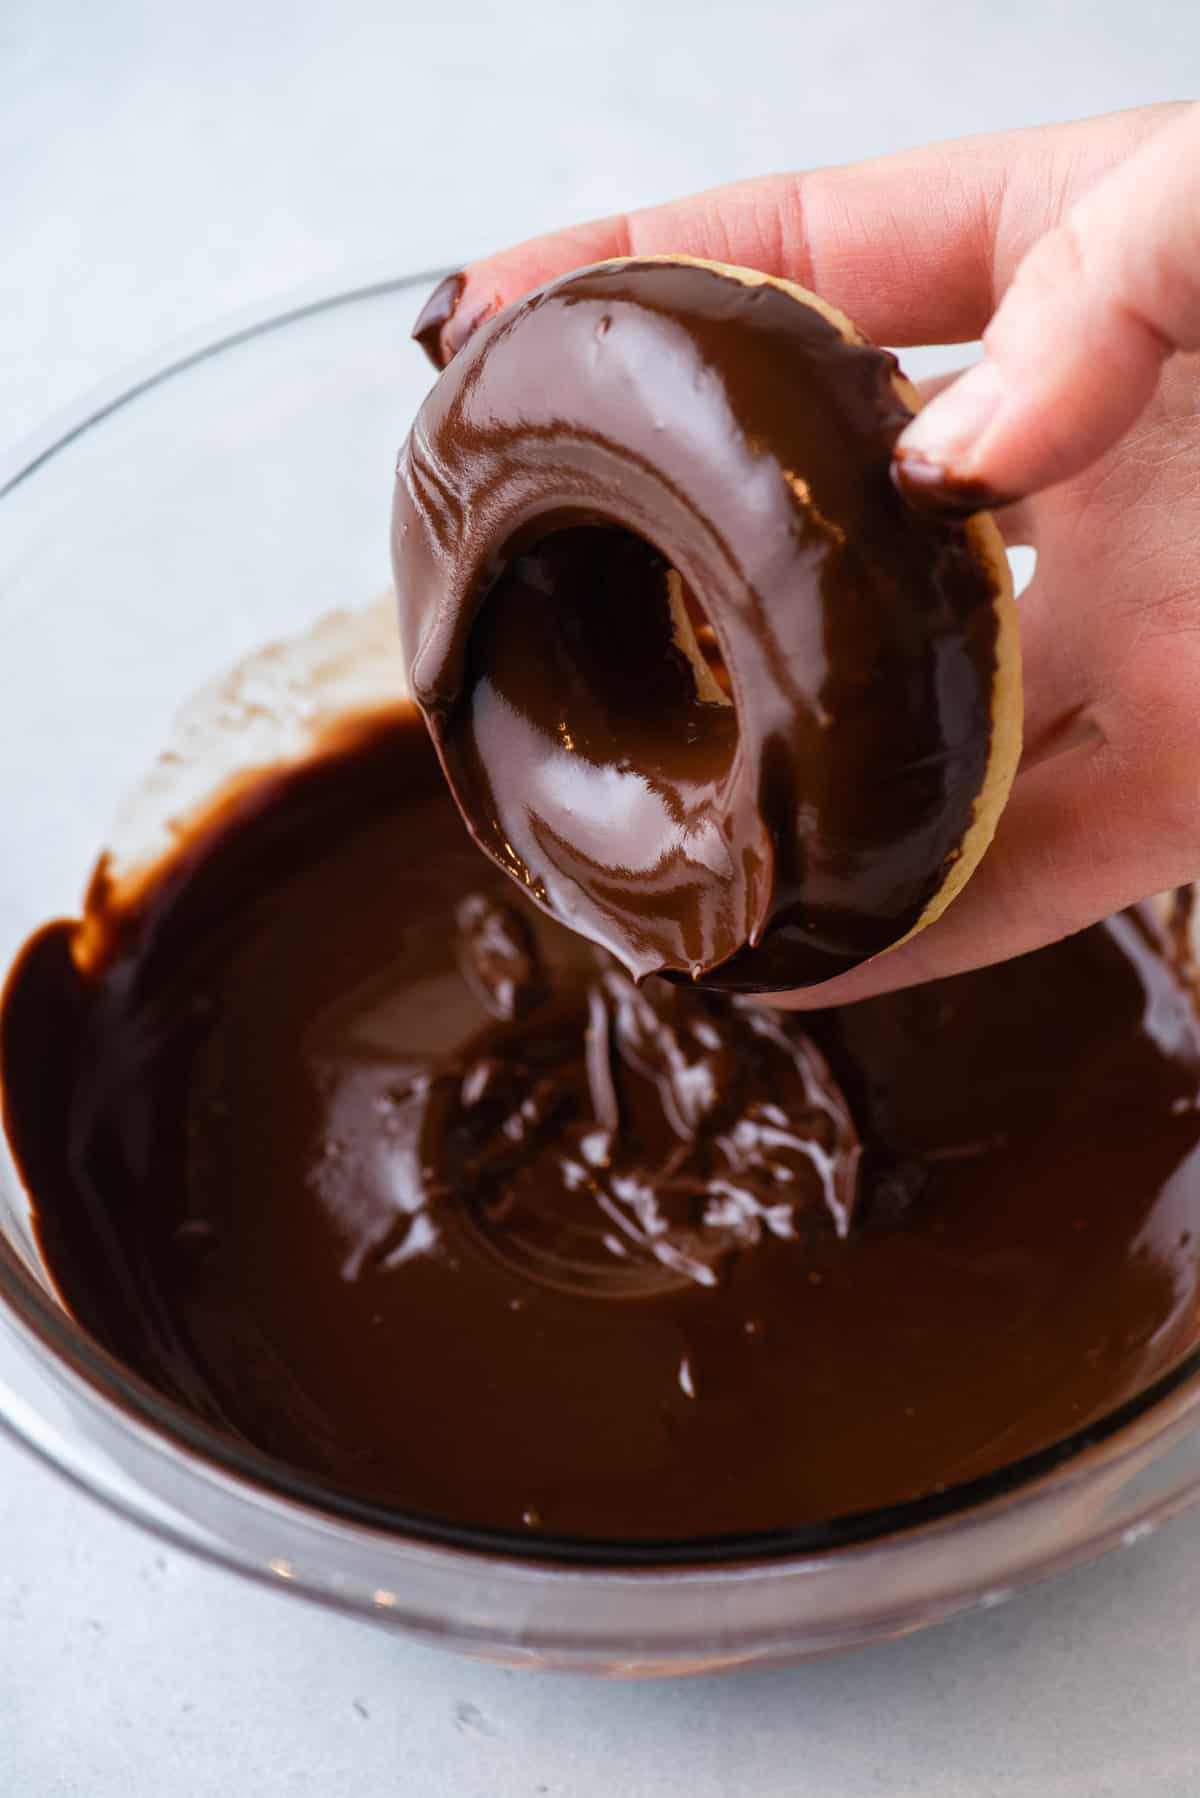 chocolate glaze for donuts in a clear glass bowl with a donut that has just been dipped in the glass being held above the bowl